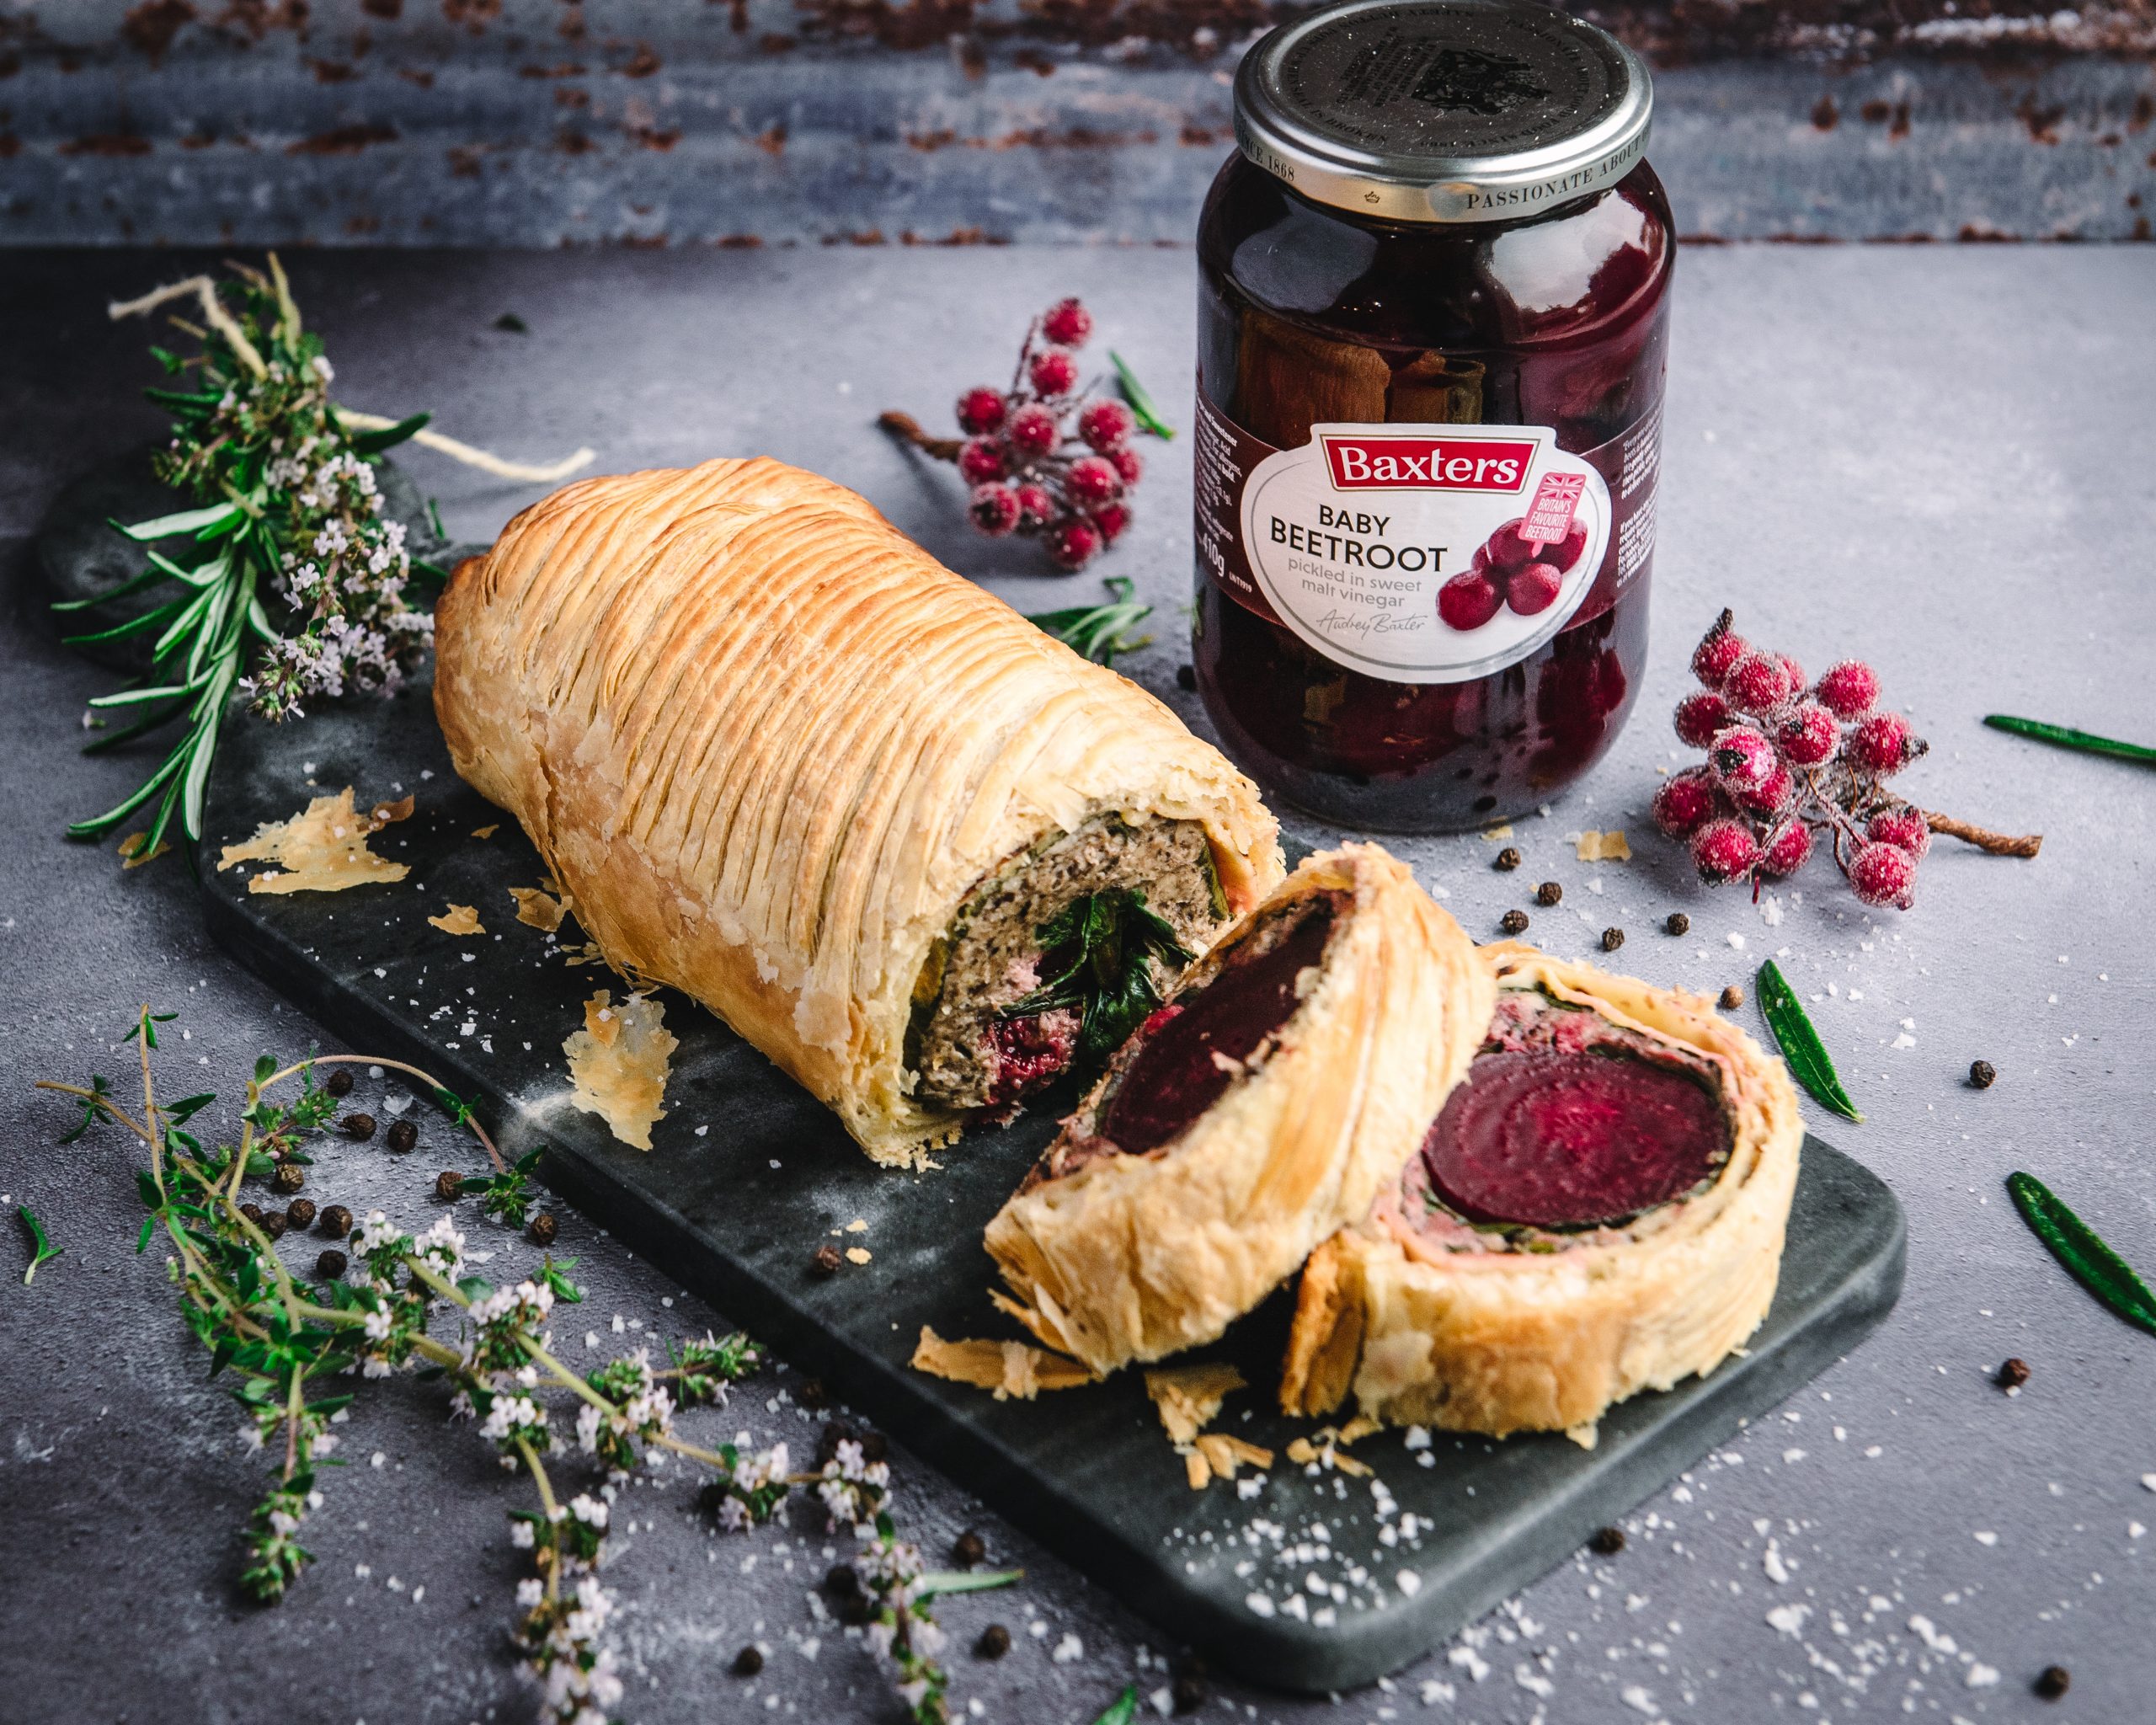 Baxters launches 20 Christmas showstopper ideas